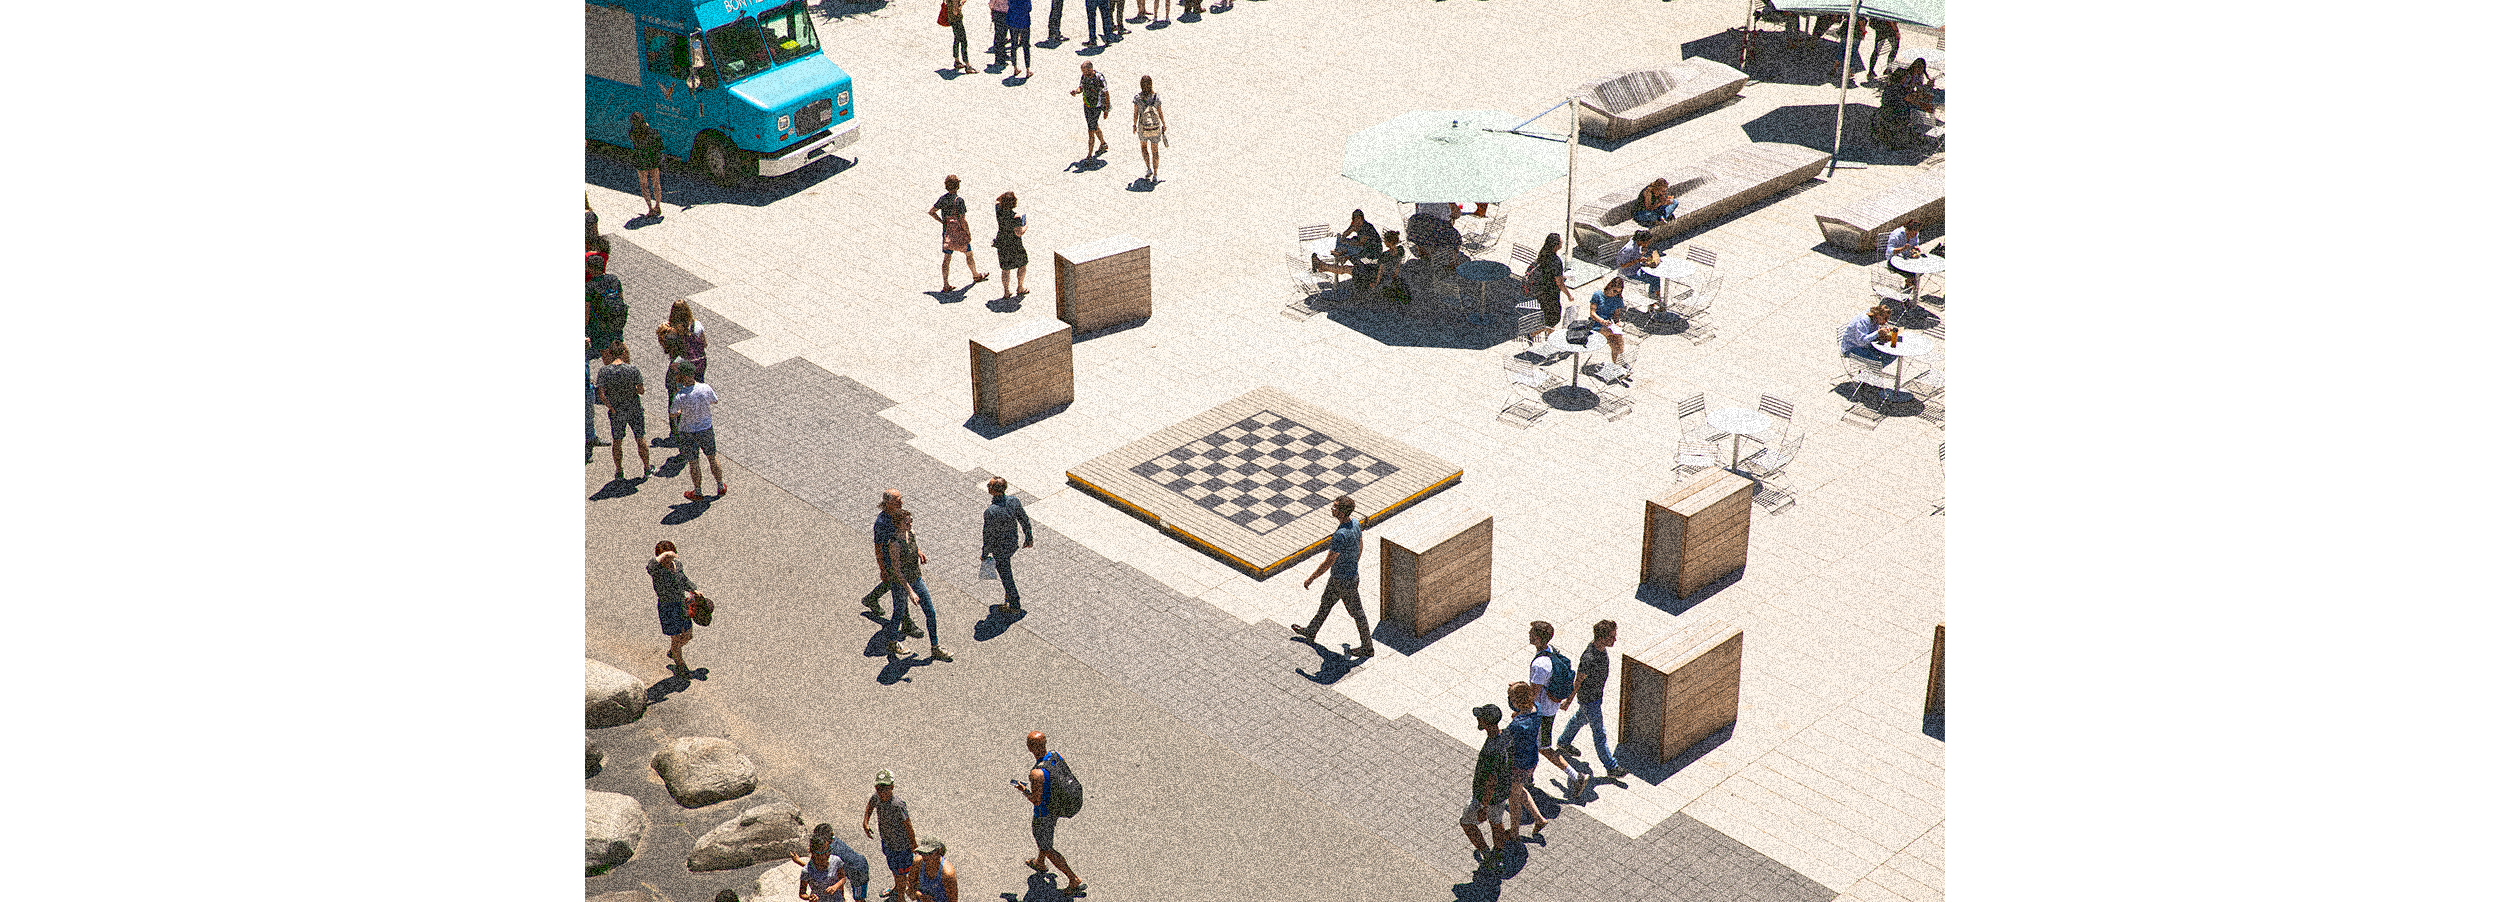 Overview of tables, food truck, passers-by in Science Center Plaza.